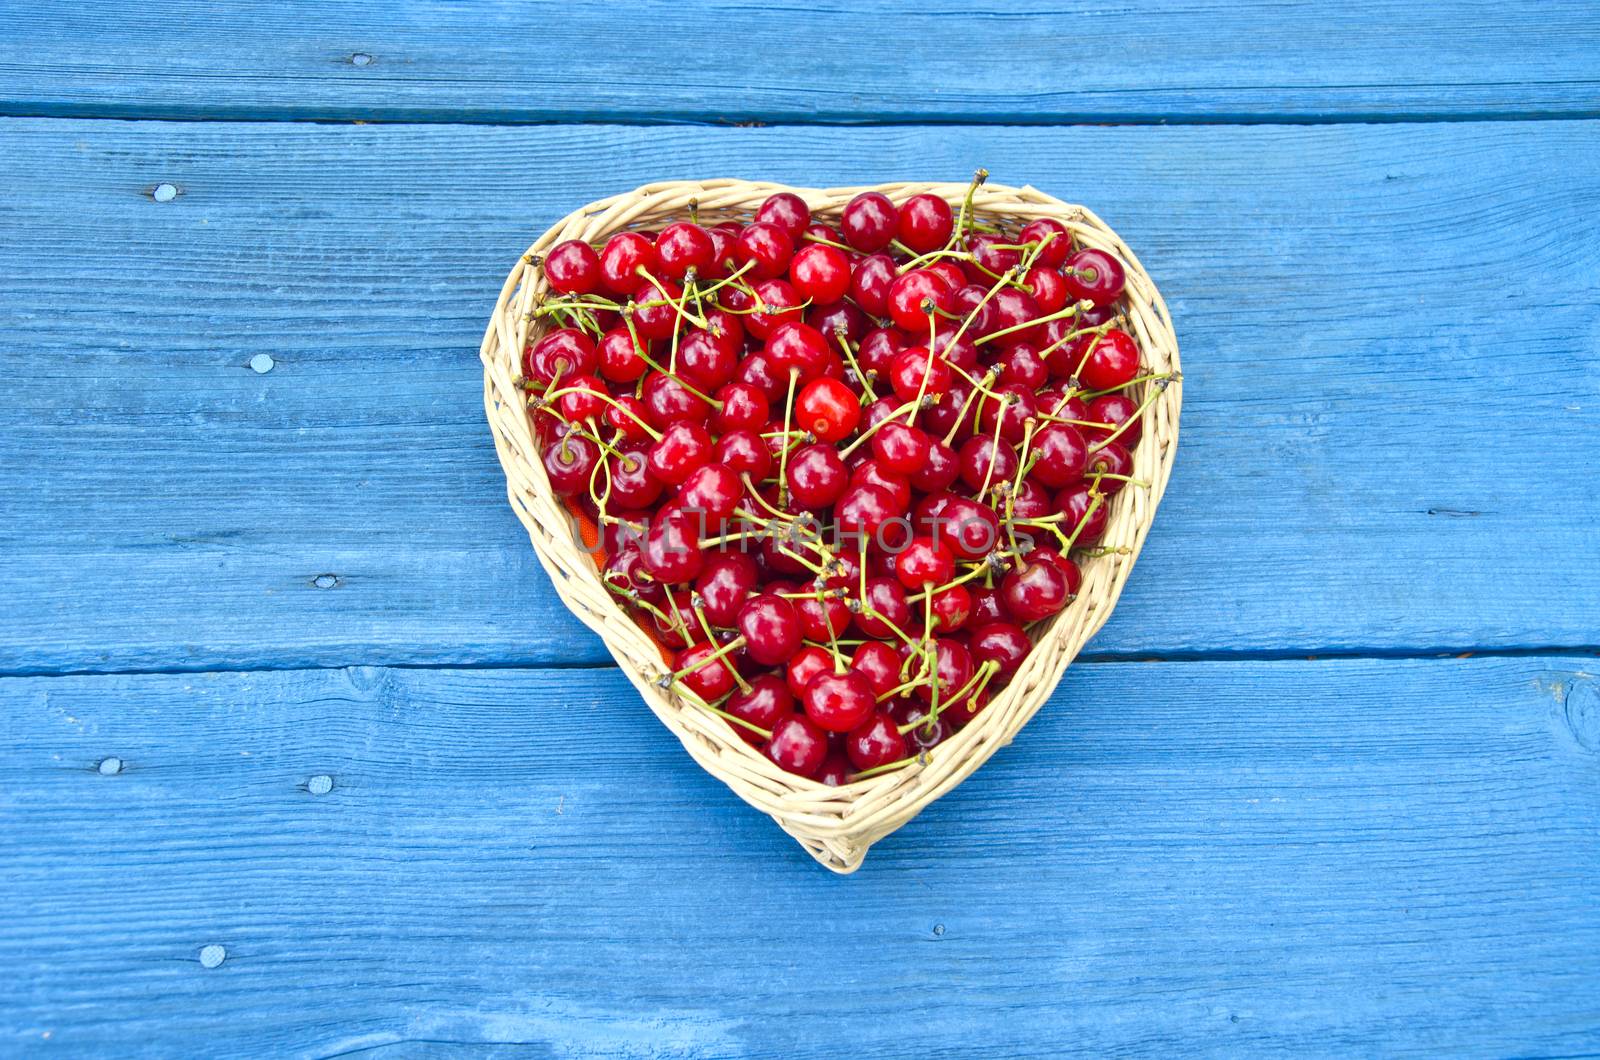 Heart shaped wicker basket full of cherries on blue background by alis_photo